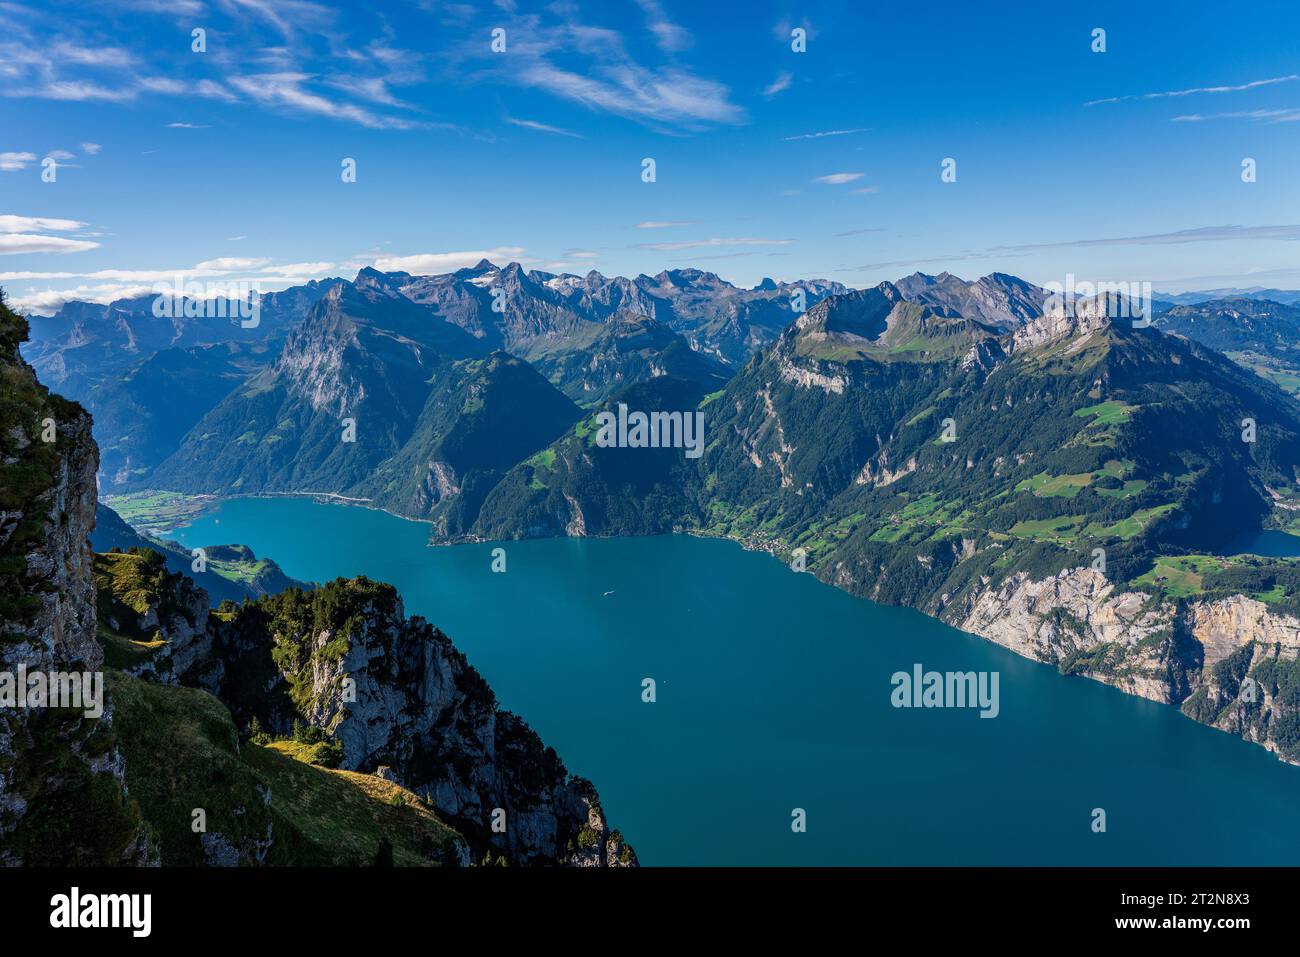 Panoramic view from Fronalpstock on Lake Lucerne in Switzerland. Stock Photo